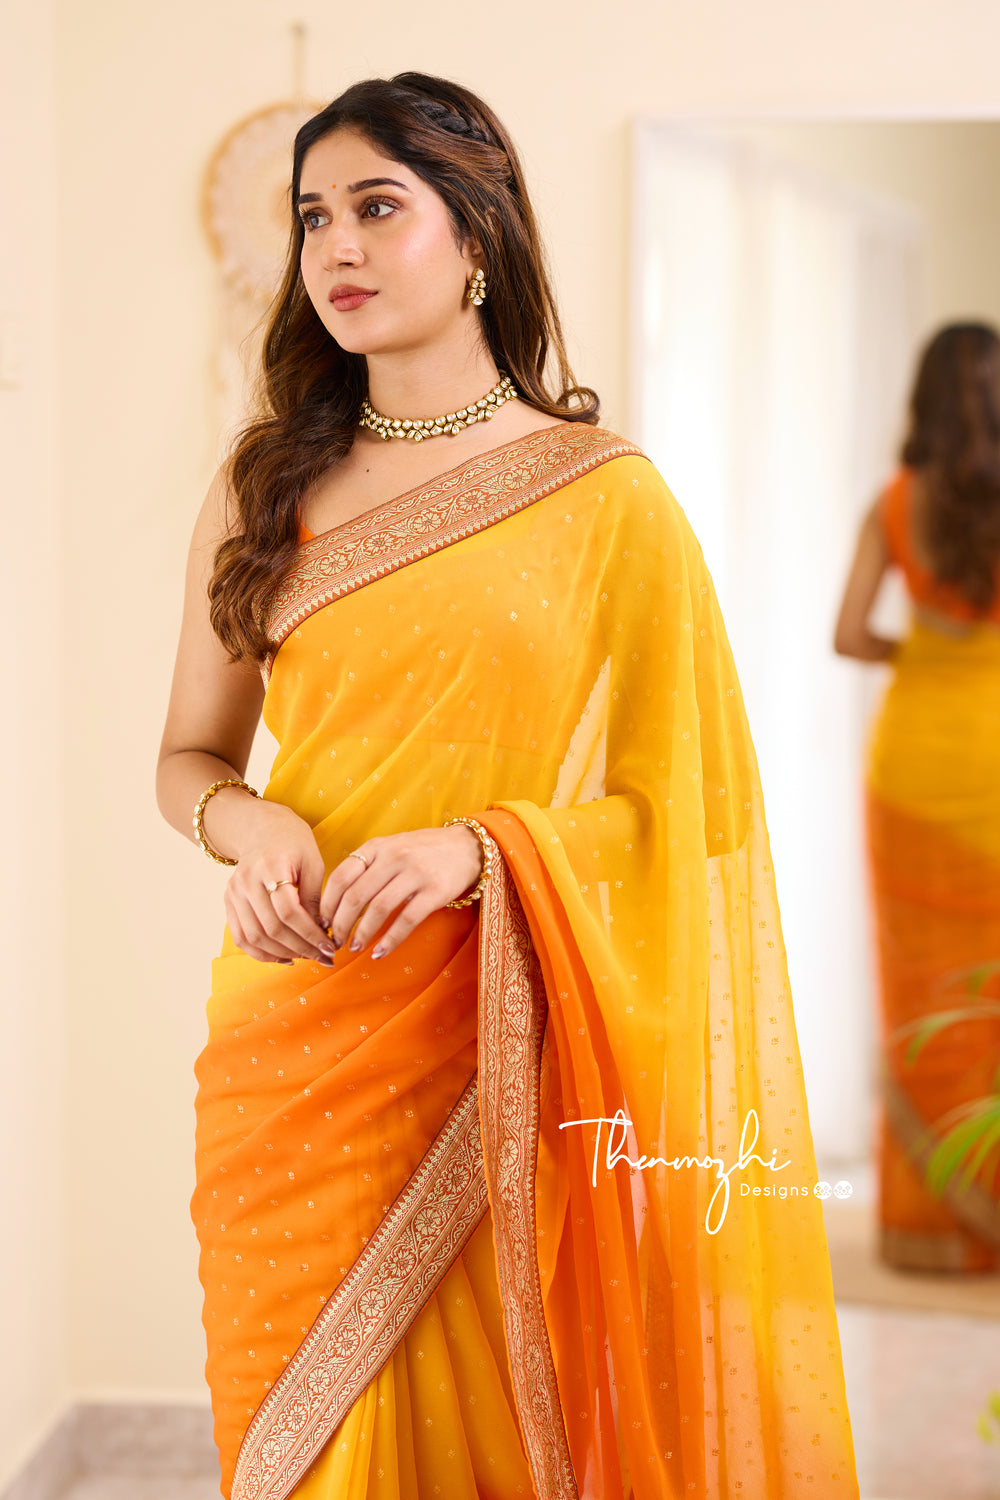 Shop For Georgette Sarees Online In India - Stylecaret.com